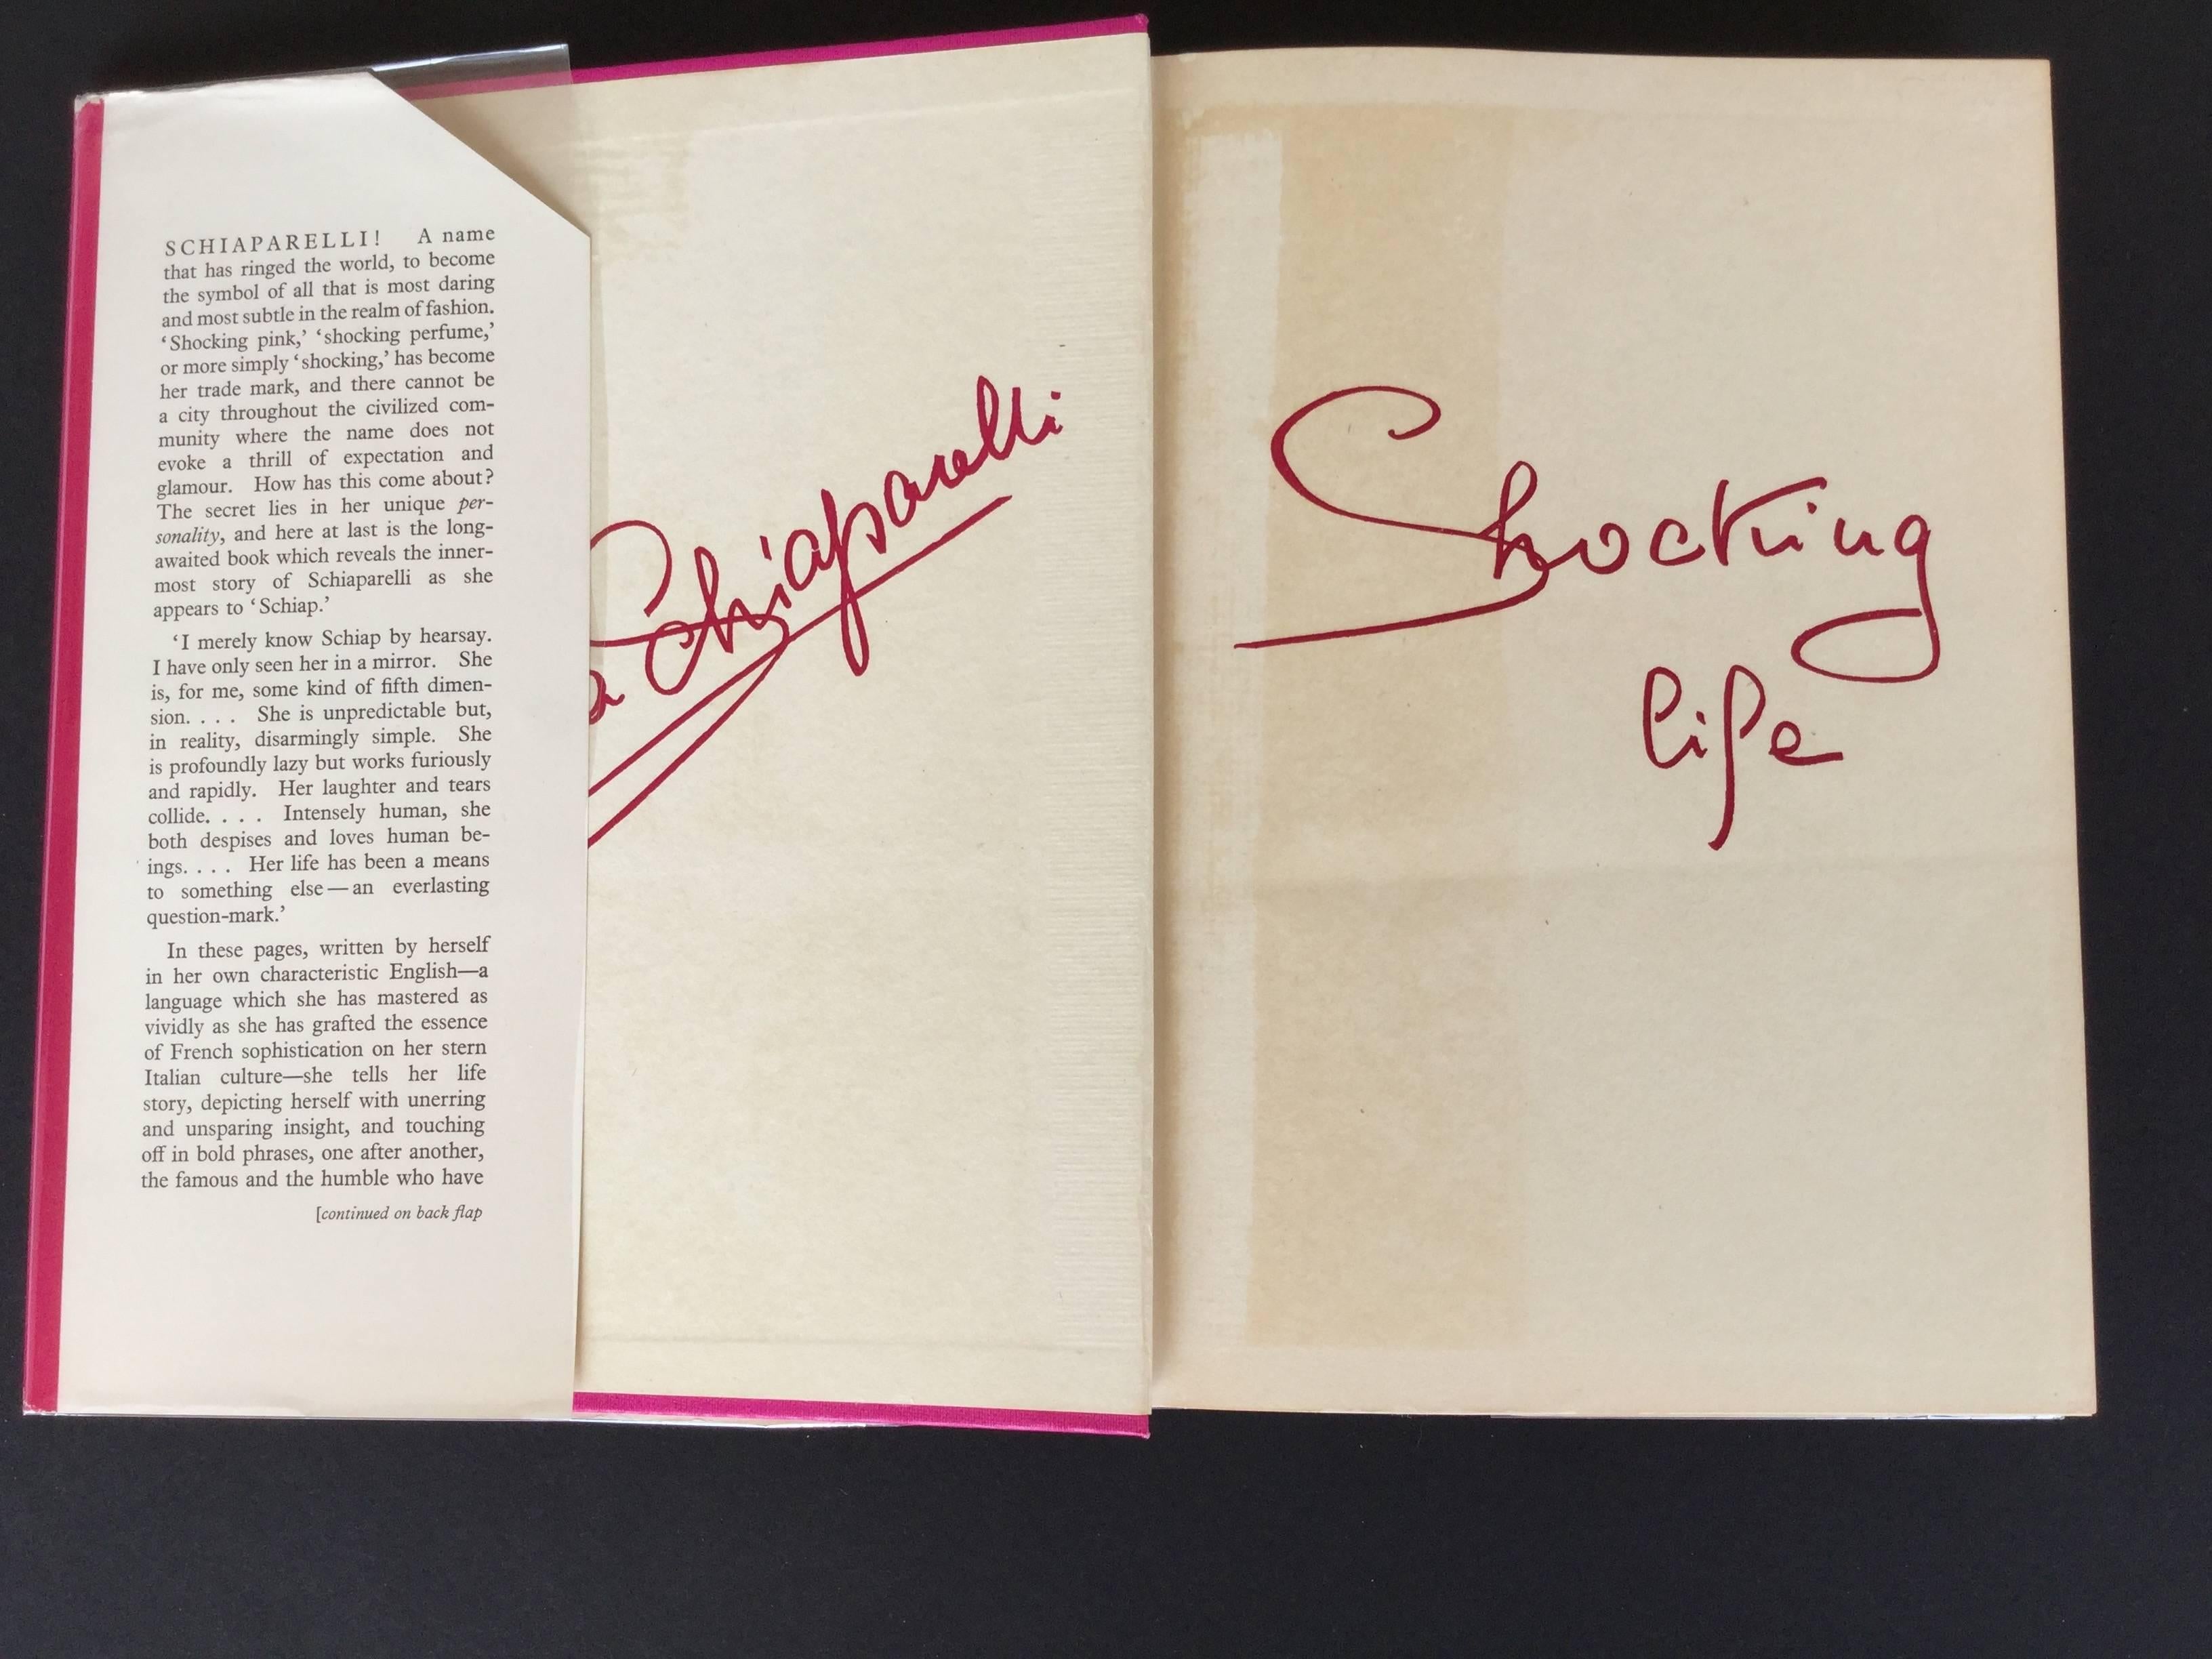 British 1st Edition of Elsa Schiaparelli's fascinating autobiography A Shocking Life. Original pink dust cover protected by (removable) clear plastic sleeve. Contains 30 illustrations; 4 color and 26 black and whites. Personally I have always